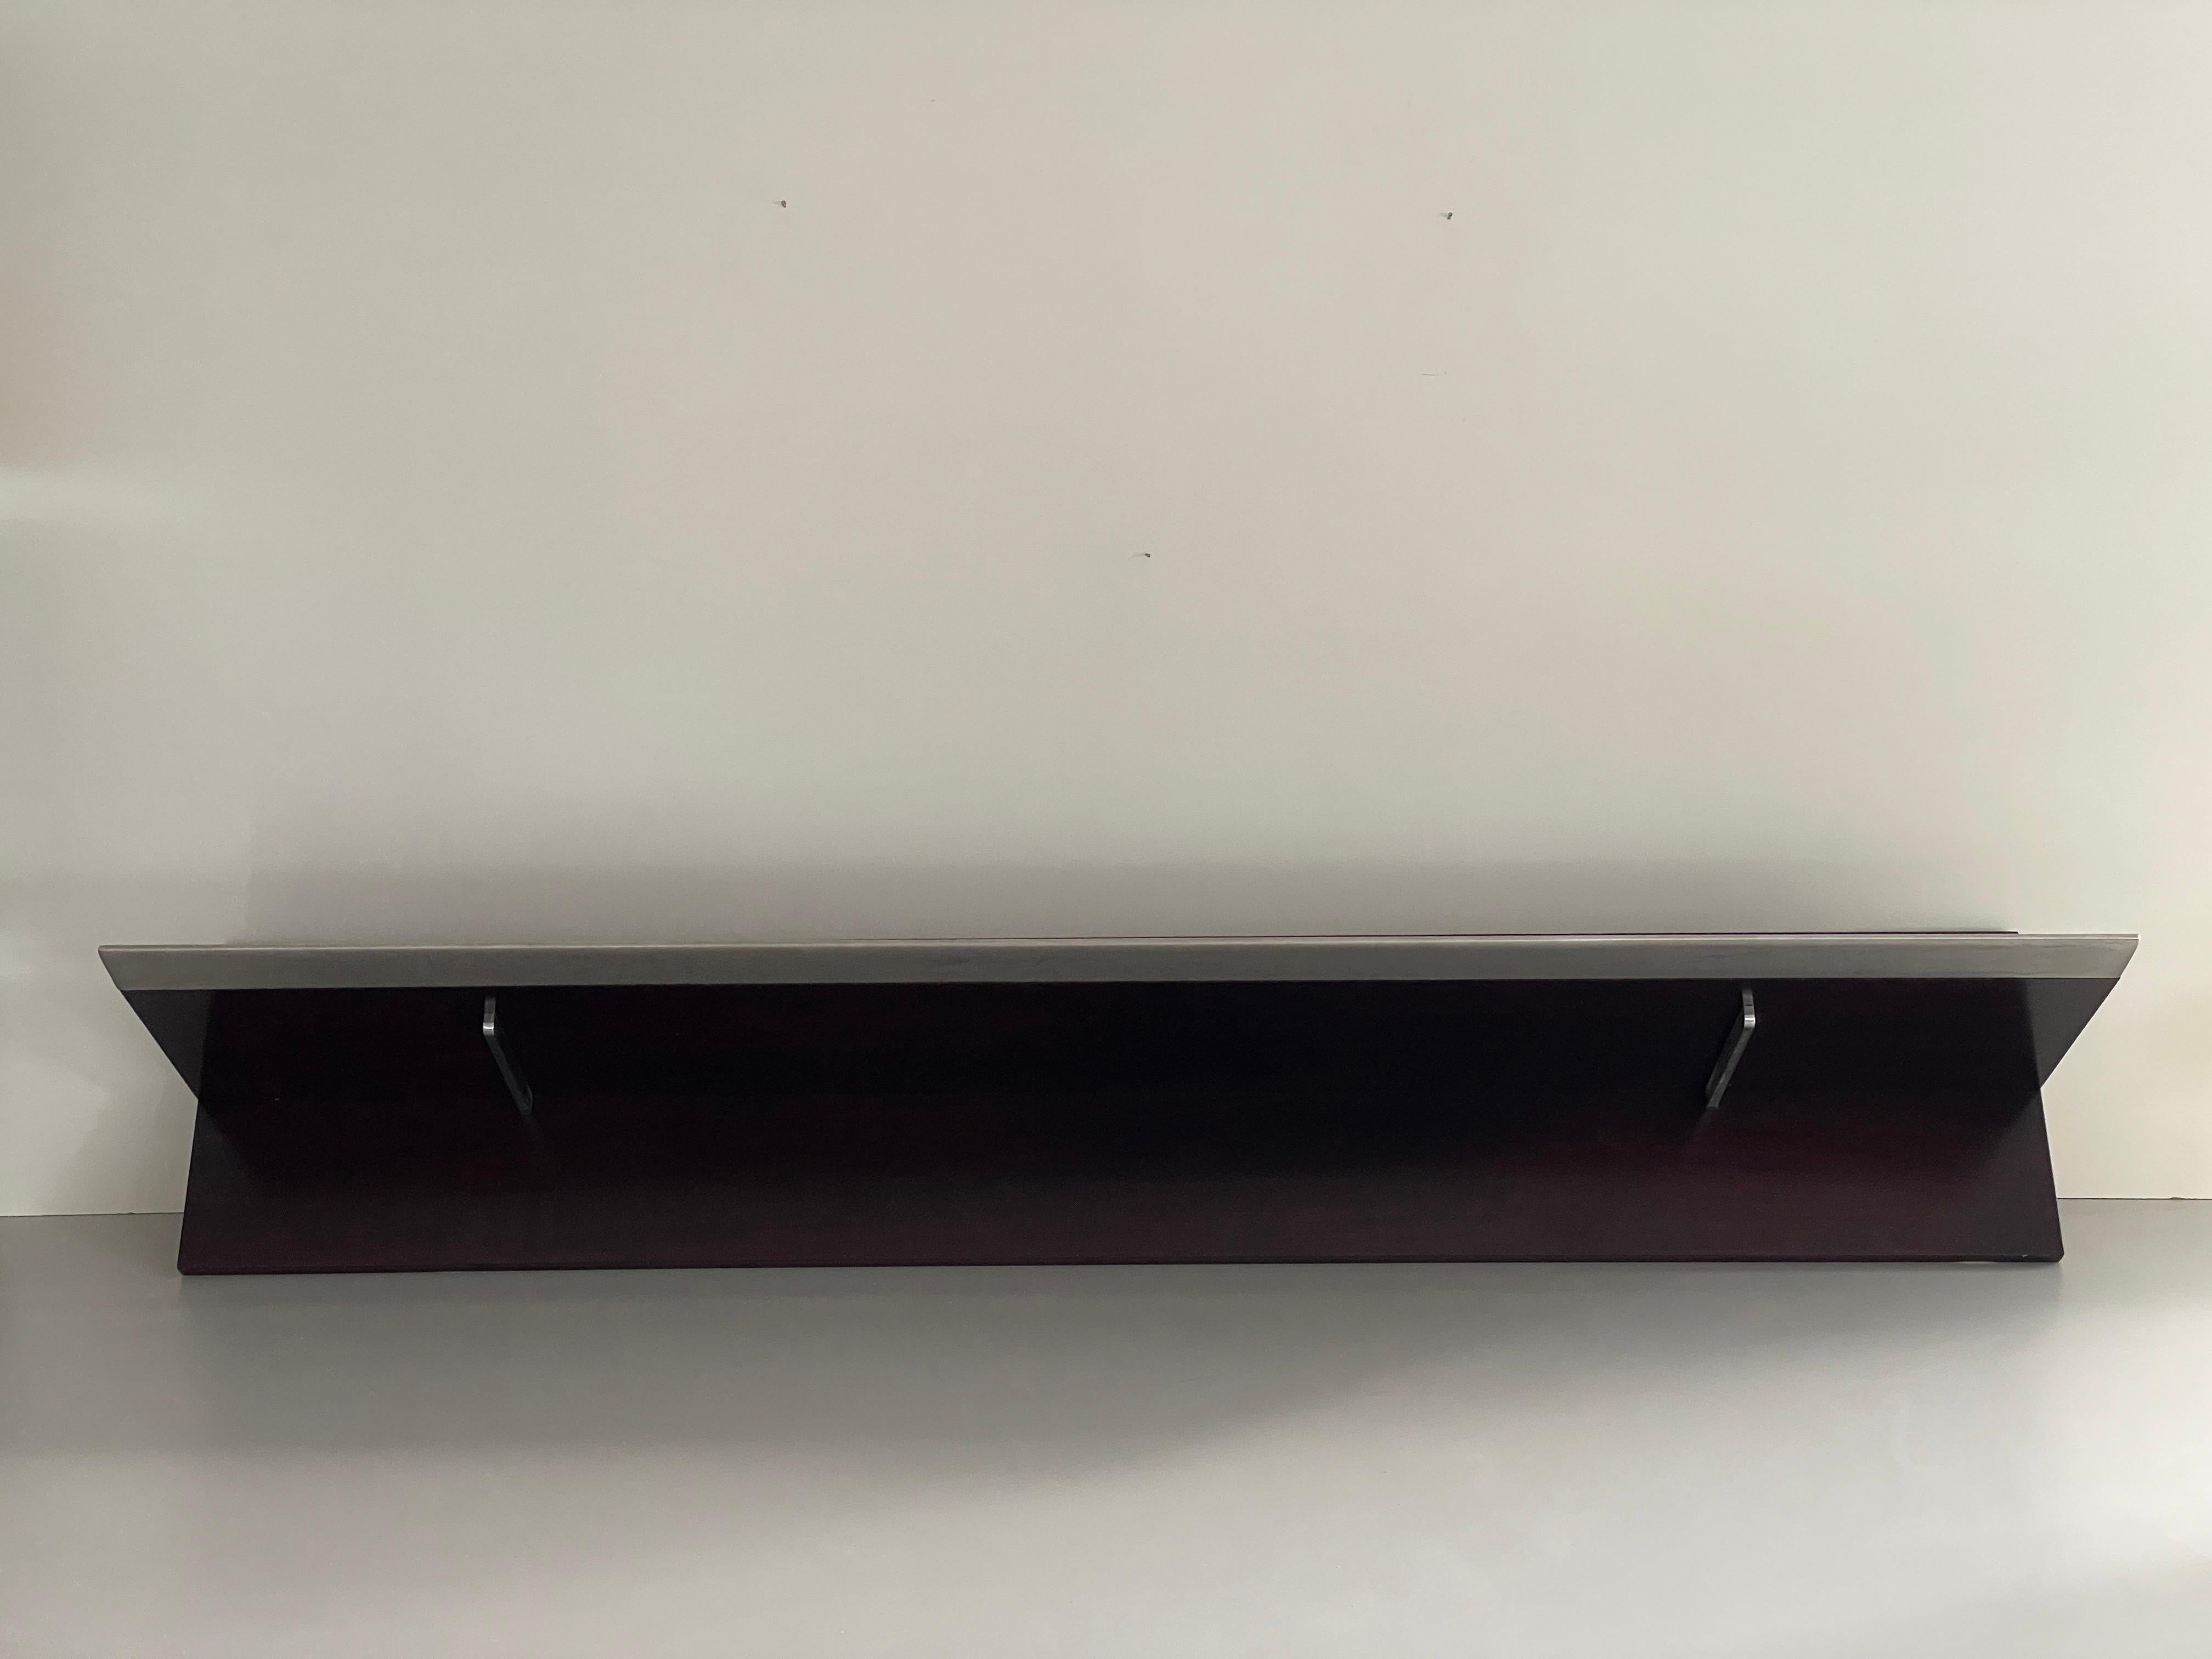 Italian Mid-century Modern Rosewood Large Shelf Steel Cover by Saporiti, 1960s, Italy For Sale